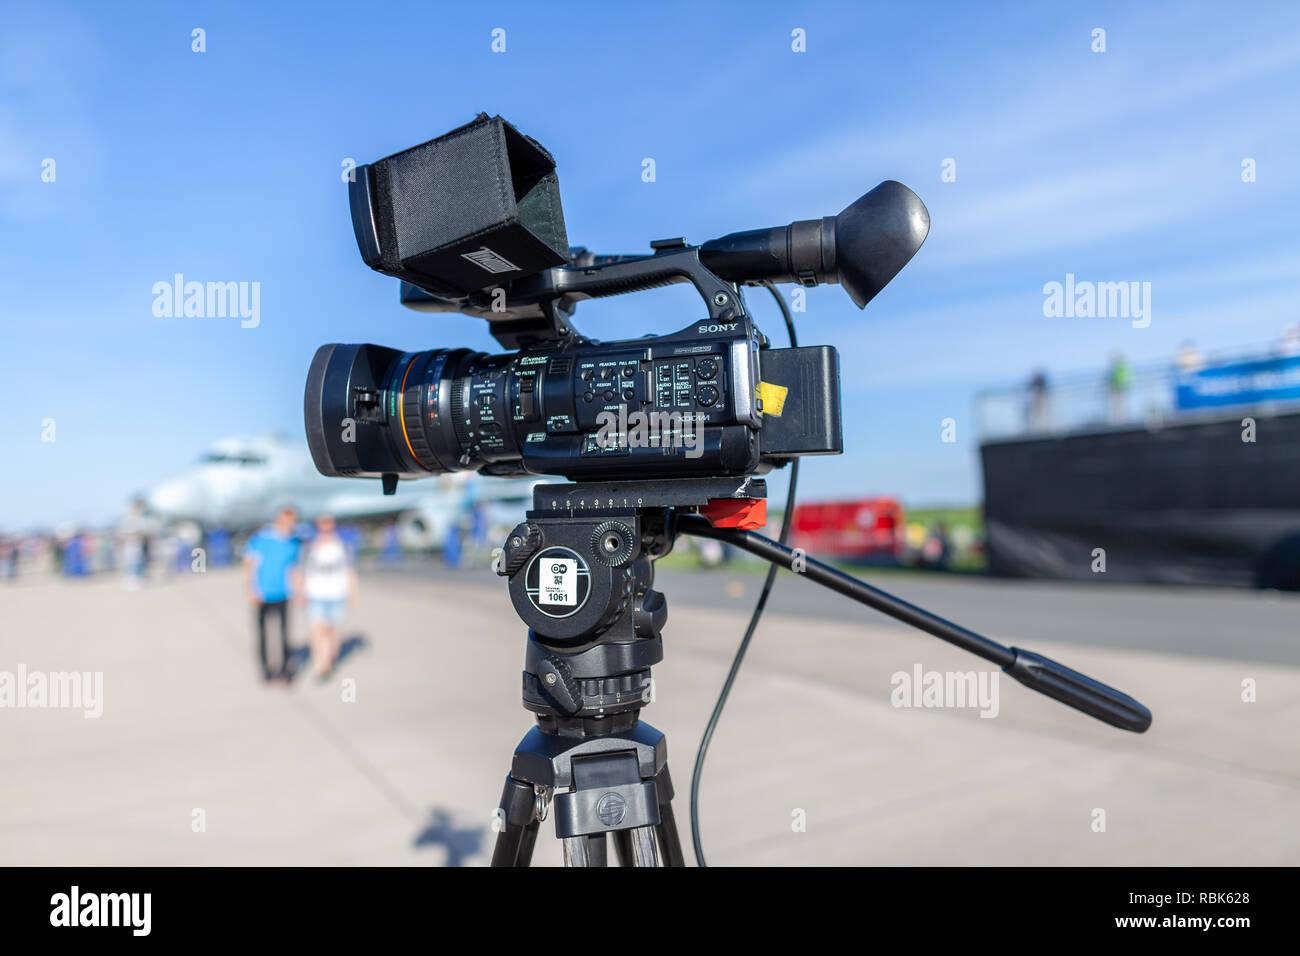 BERLIN / GERMANY - APRIL 28, 2018: Sony XDCAM film camera stands on tripod at Berlin Air show Stock Photo